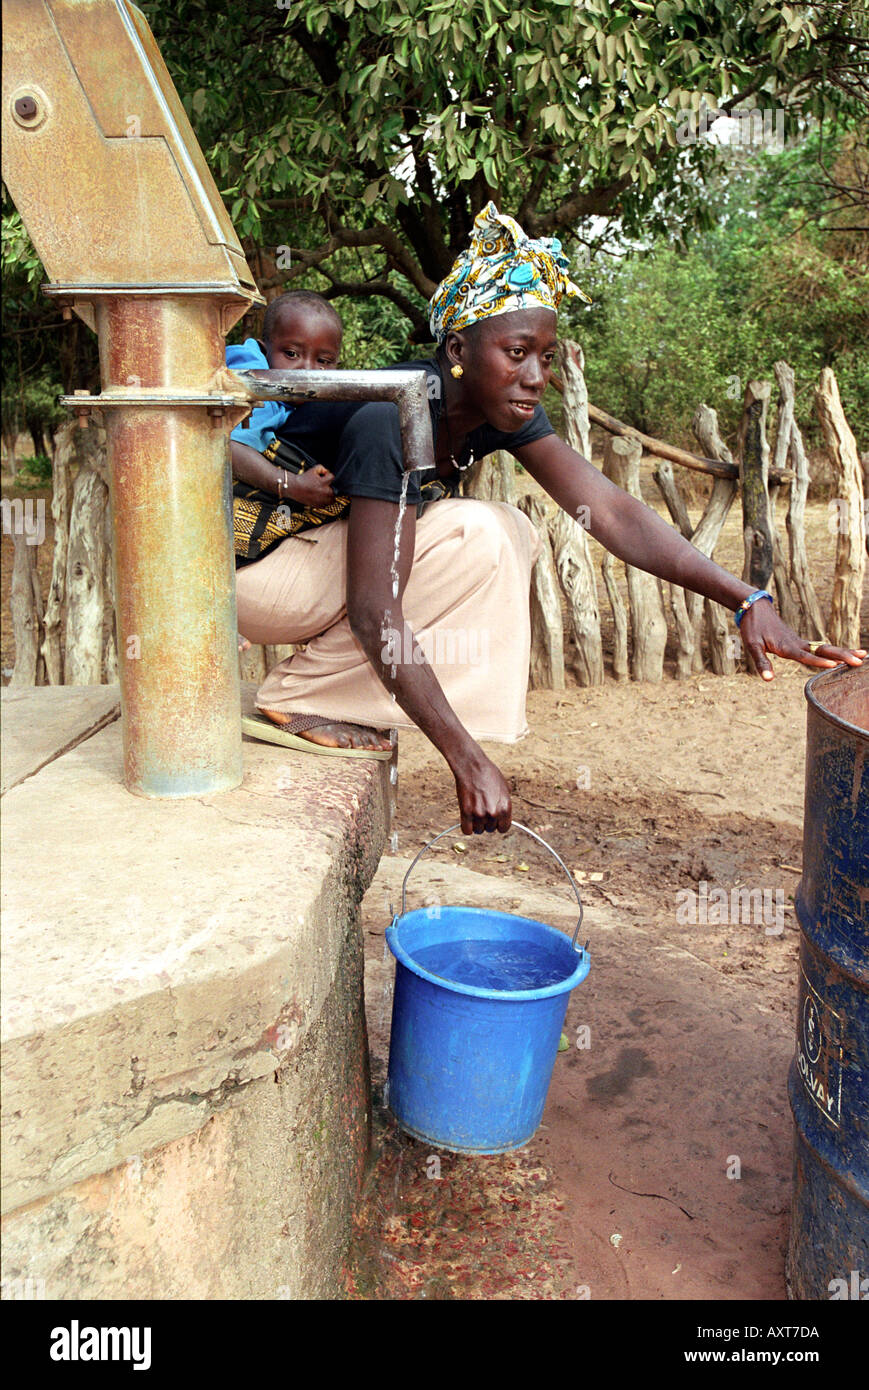 An African woman collecting water in The Gambia West Africa Stock Photo